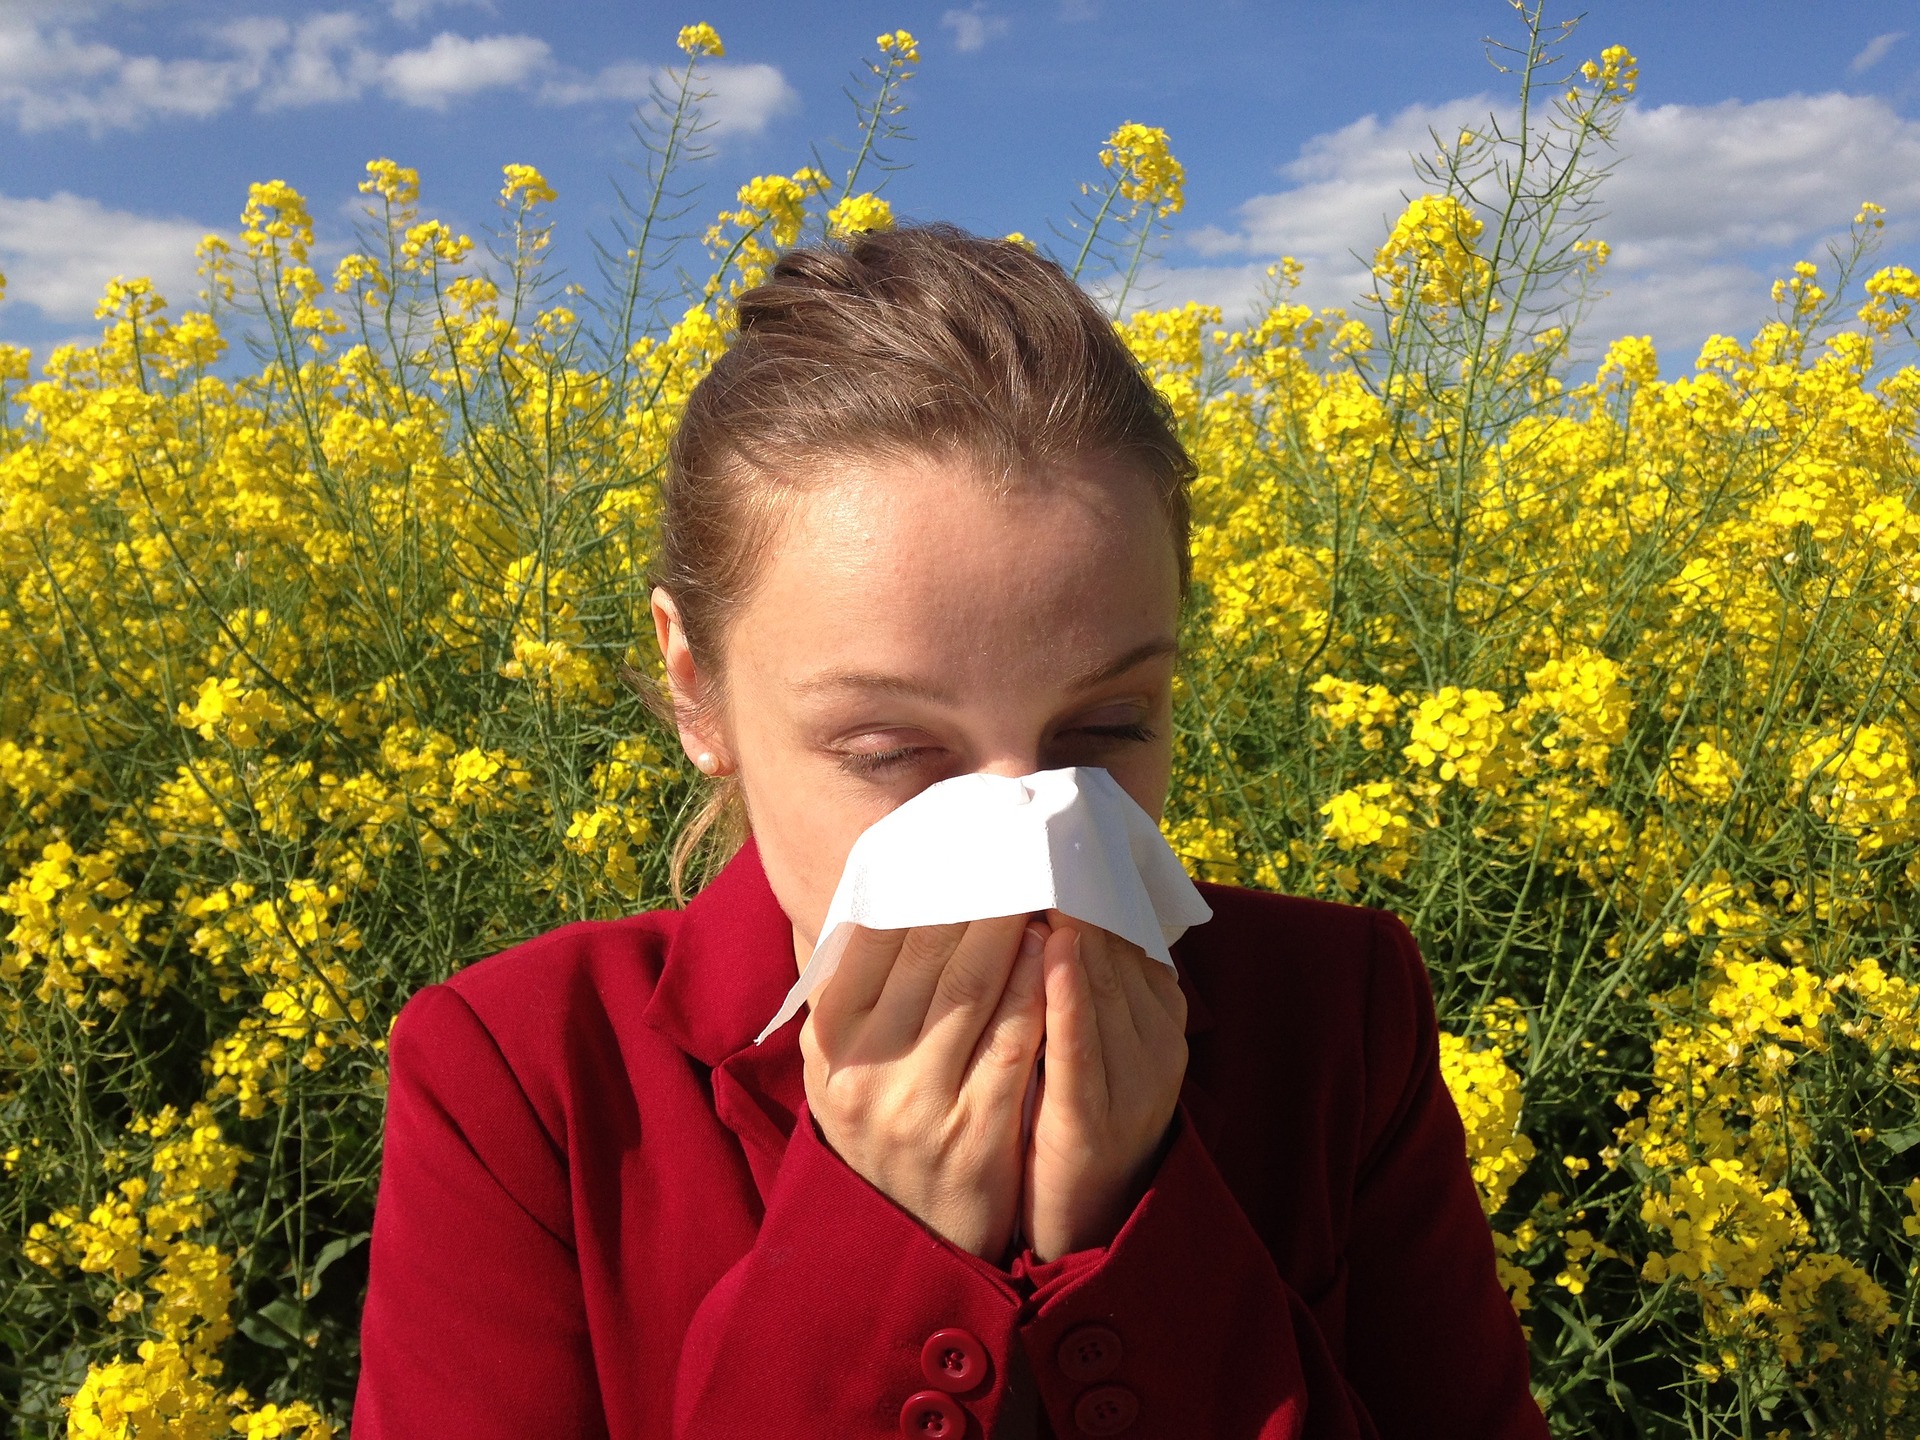 Allergy Tips To Help Avoid Itchy Eyes In The Spring